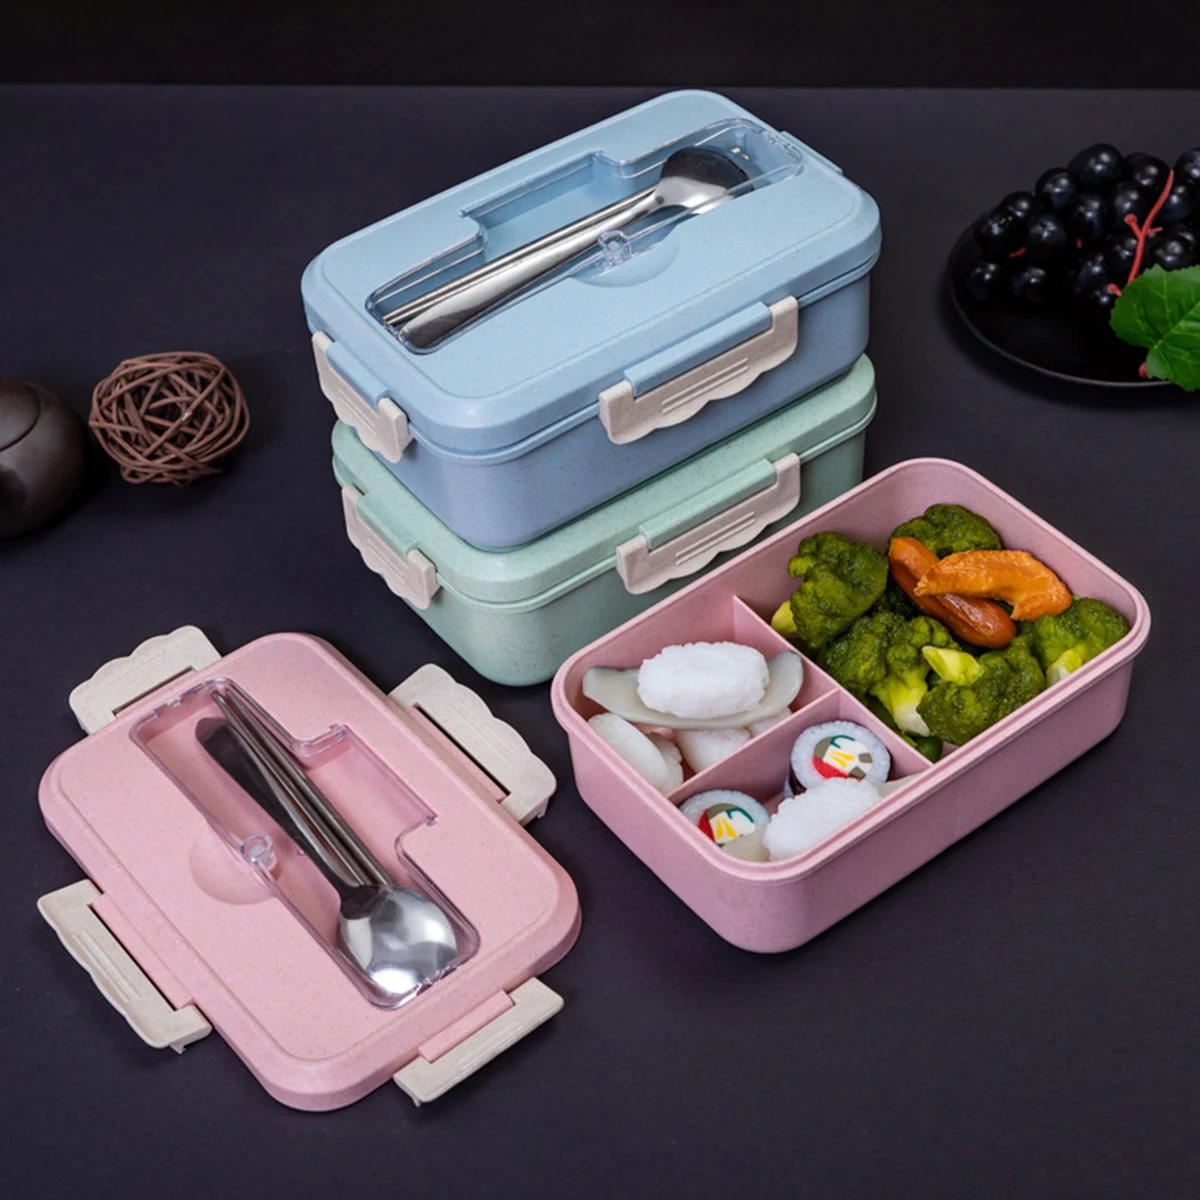 

NEW Bento Box for Kids Lunch Box Portable Bento Lunch Box with 3 Compartments Lunch Containers Leak-Proof Meal Prep Containers